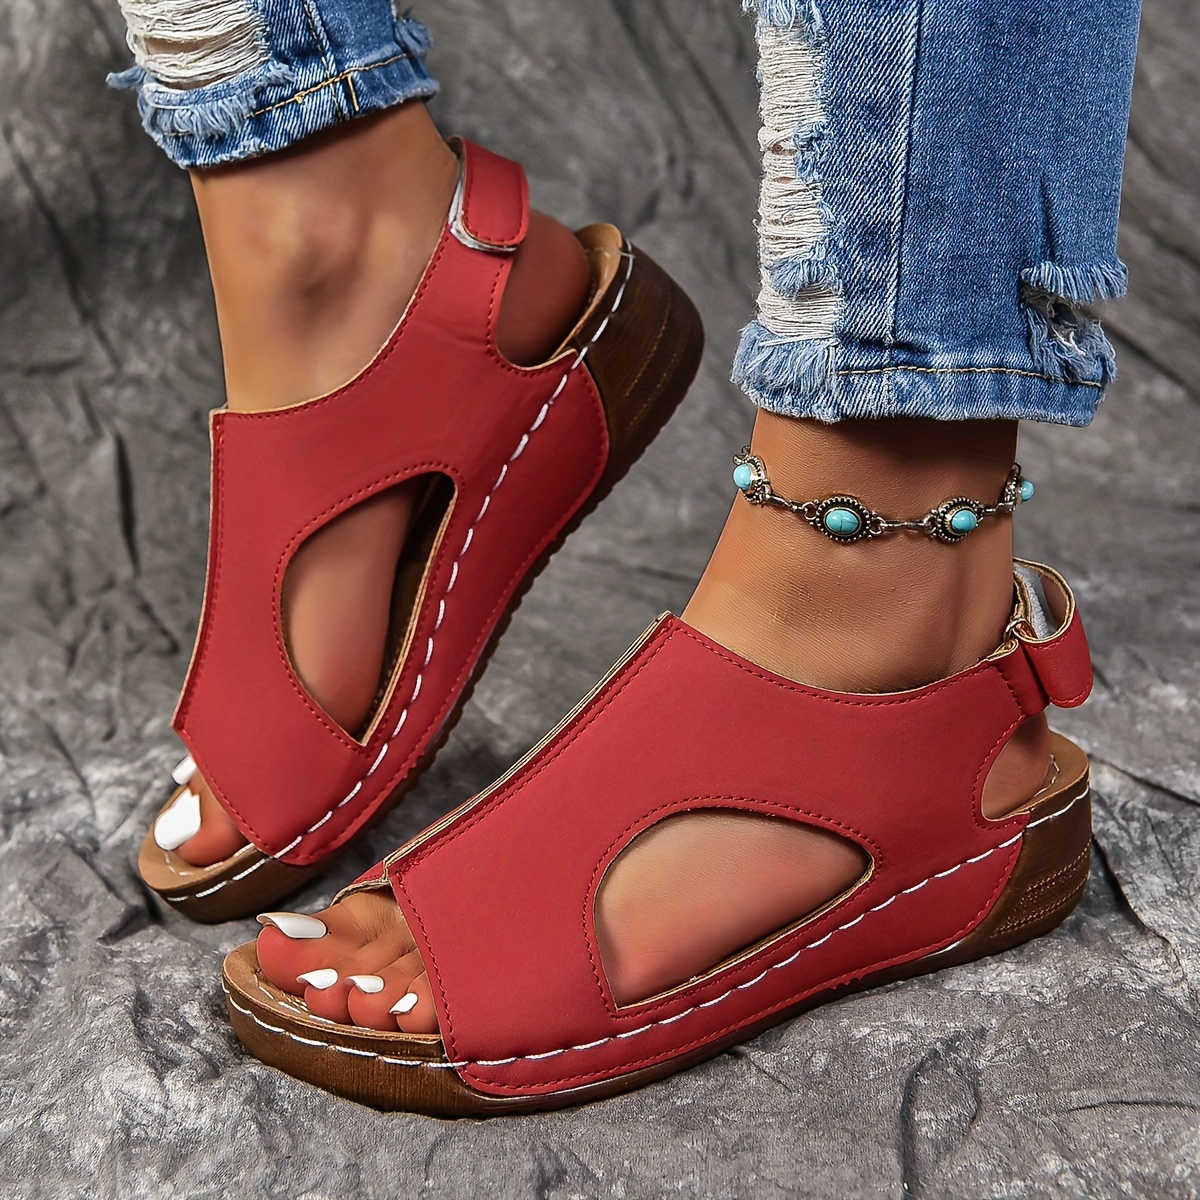 women s solid color wedge heeled sandals casual open toe details 27